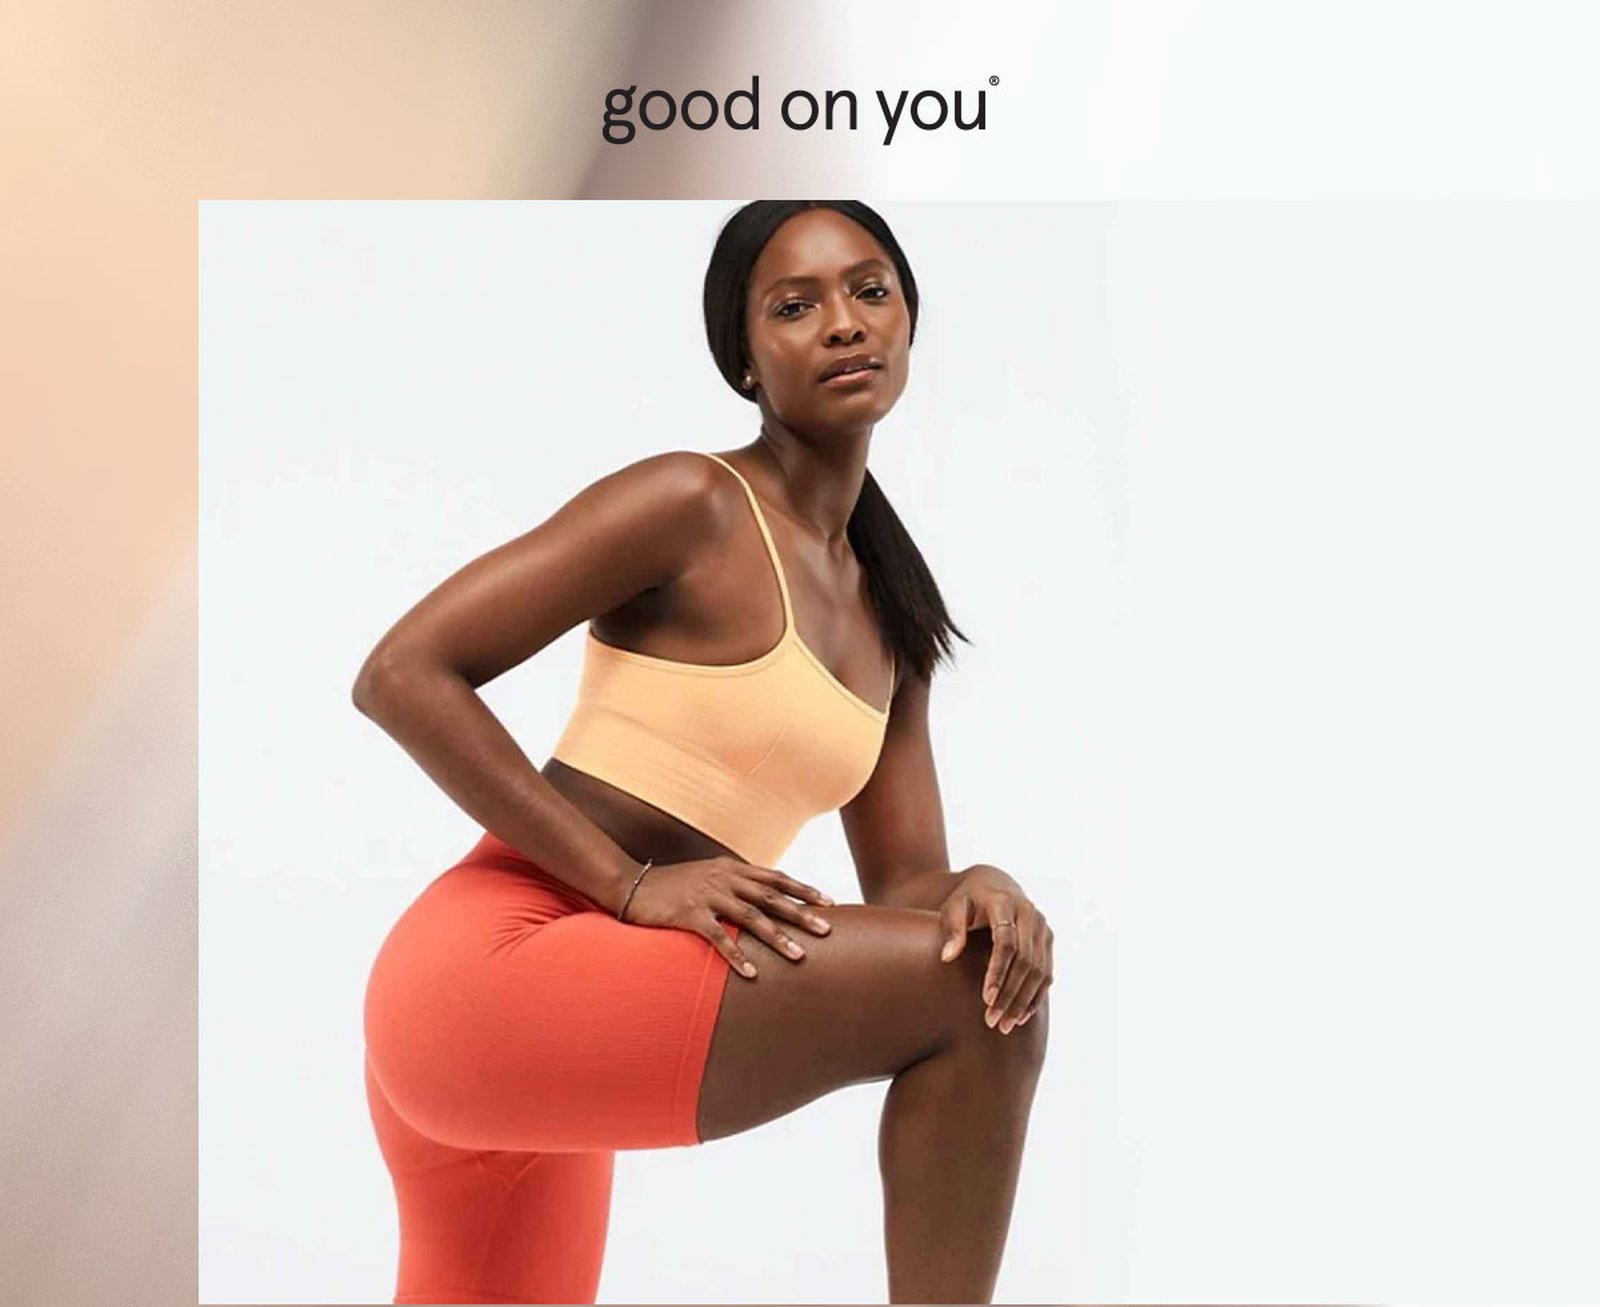 Good On You: How ethical is Fabletics?